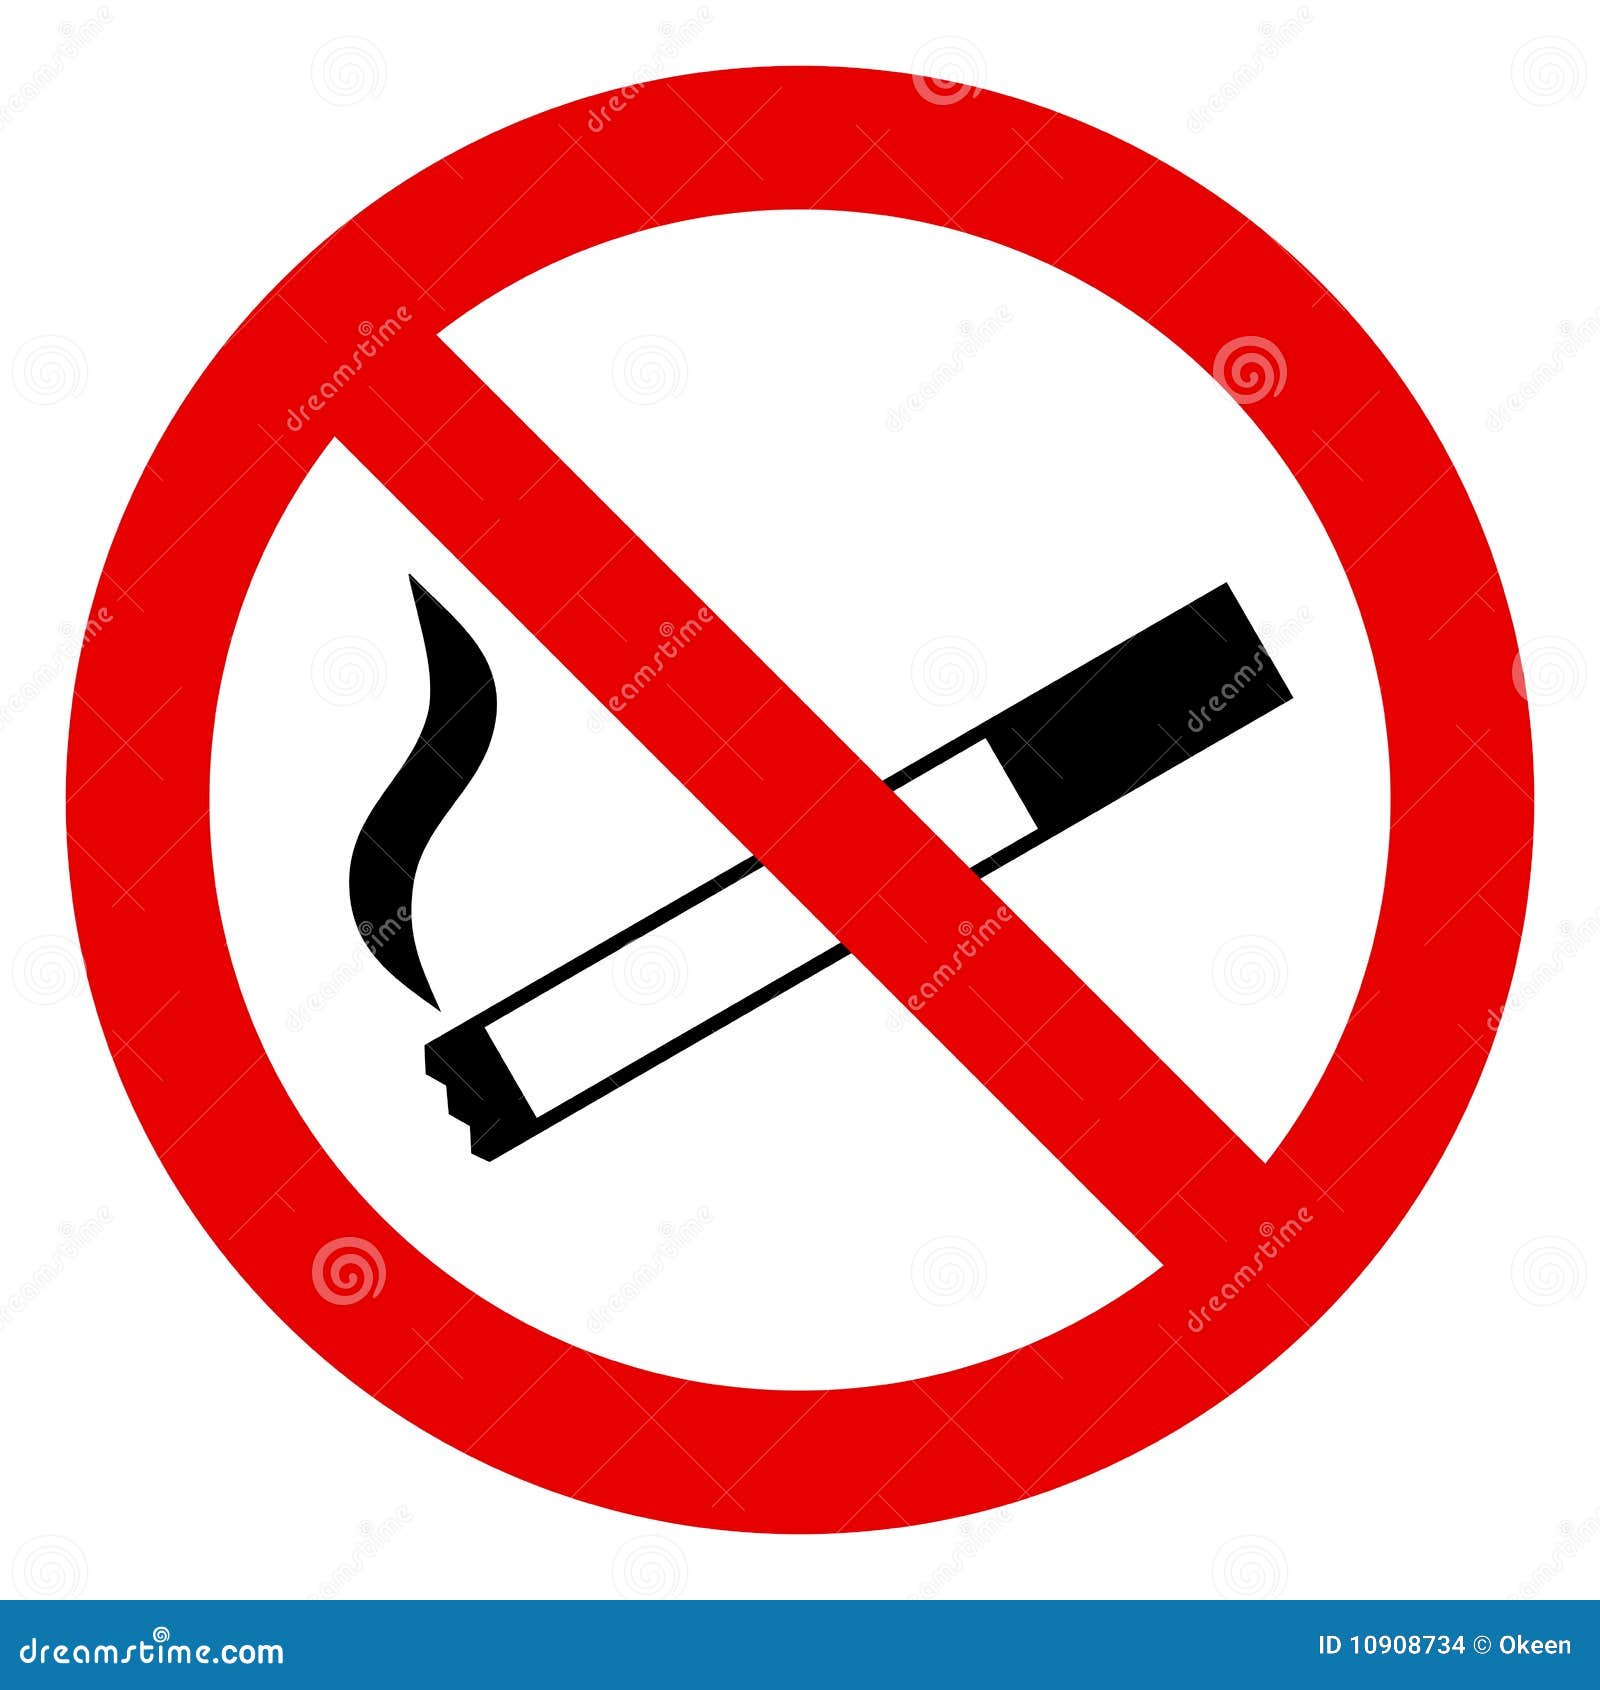 No Smoking Sign stock vector. Illustration of care, cigarette - 10908734